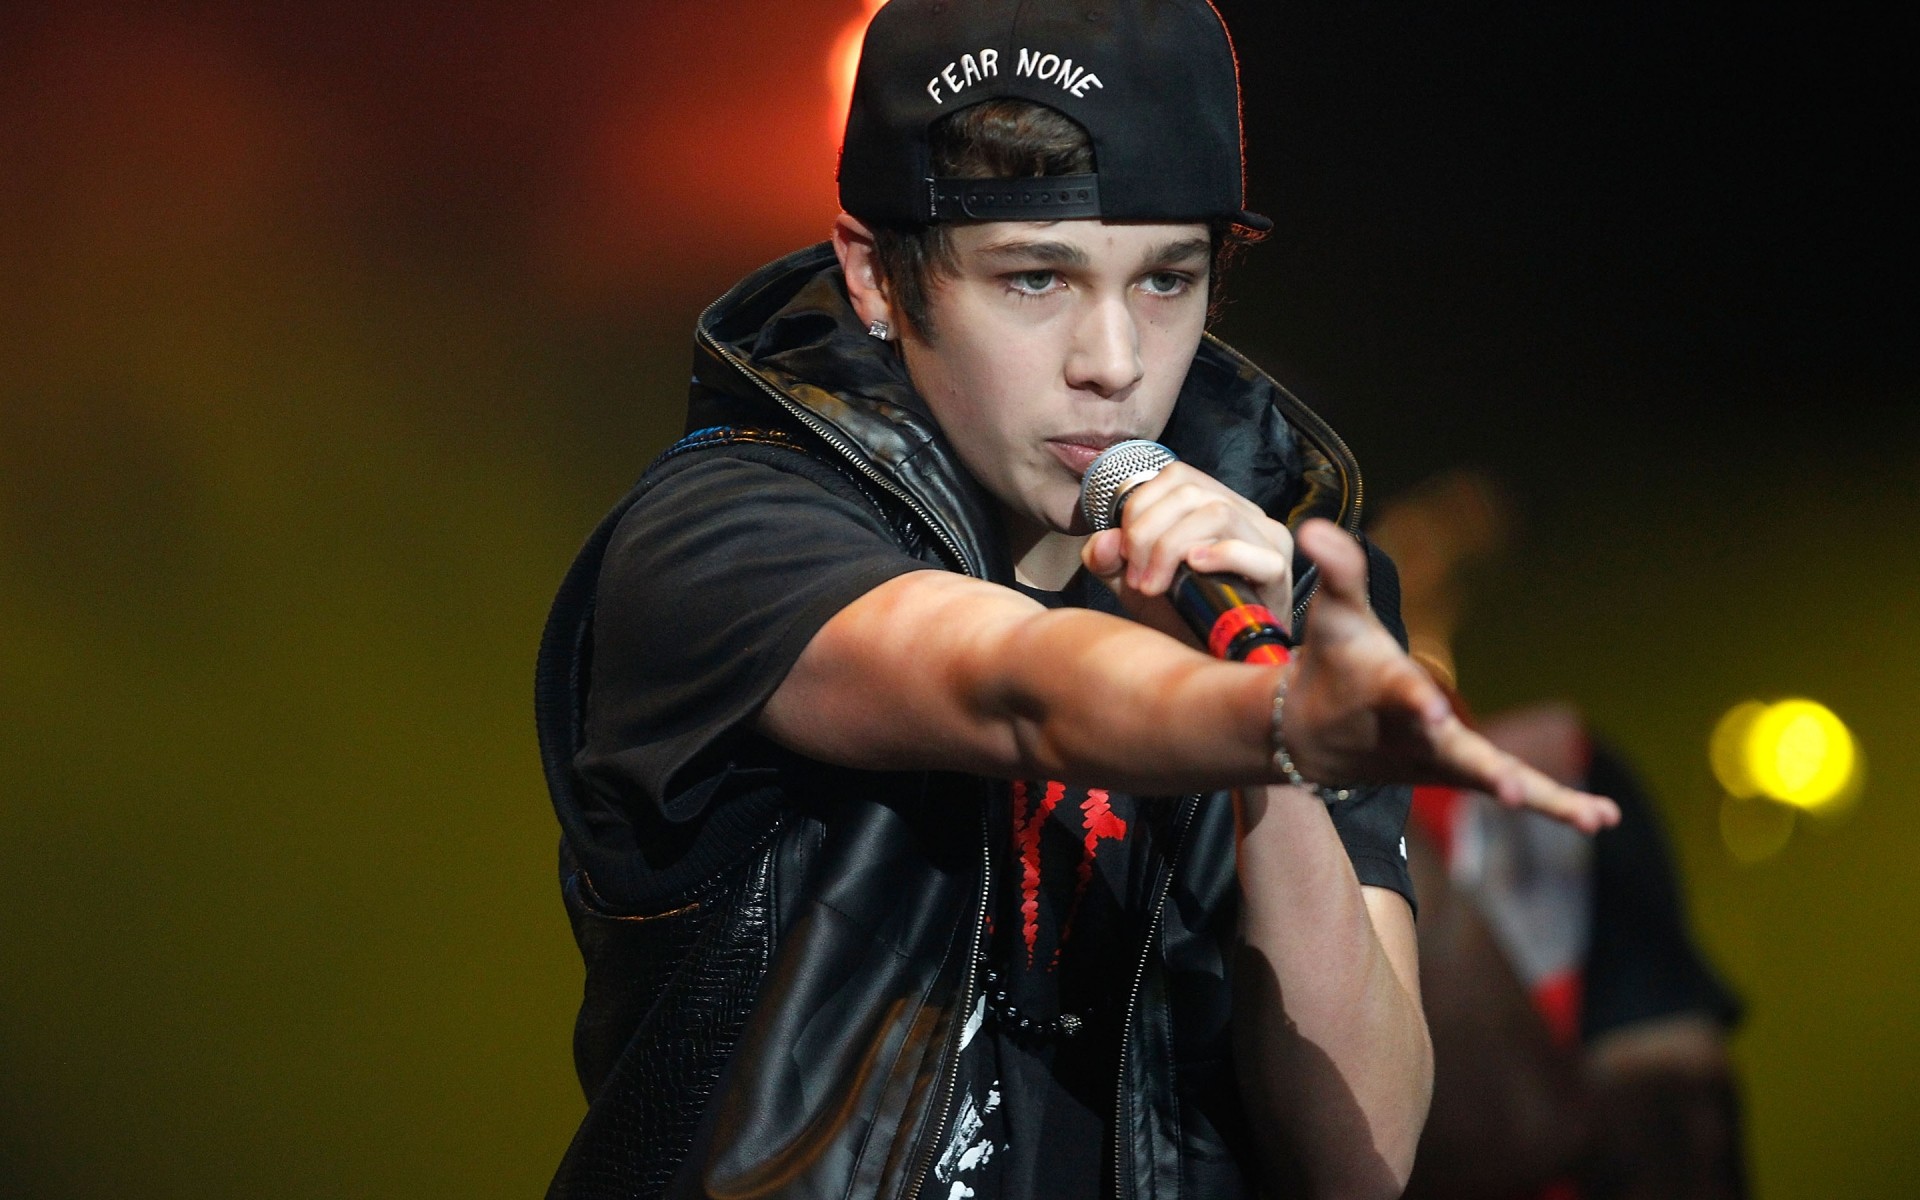 musicians performance concert music musician festival singer stadium competition stage band austin mahone